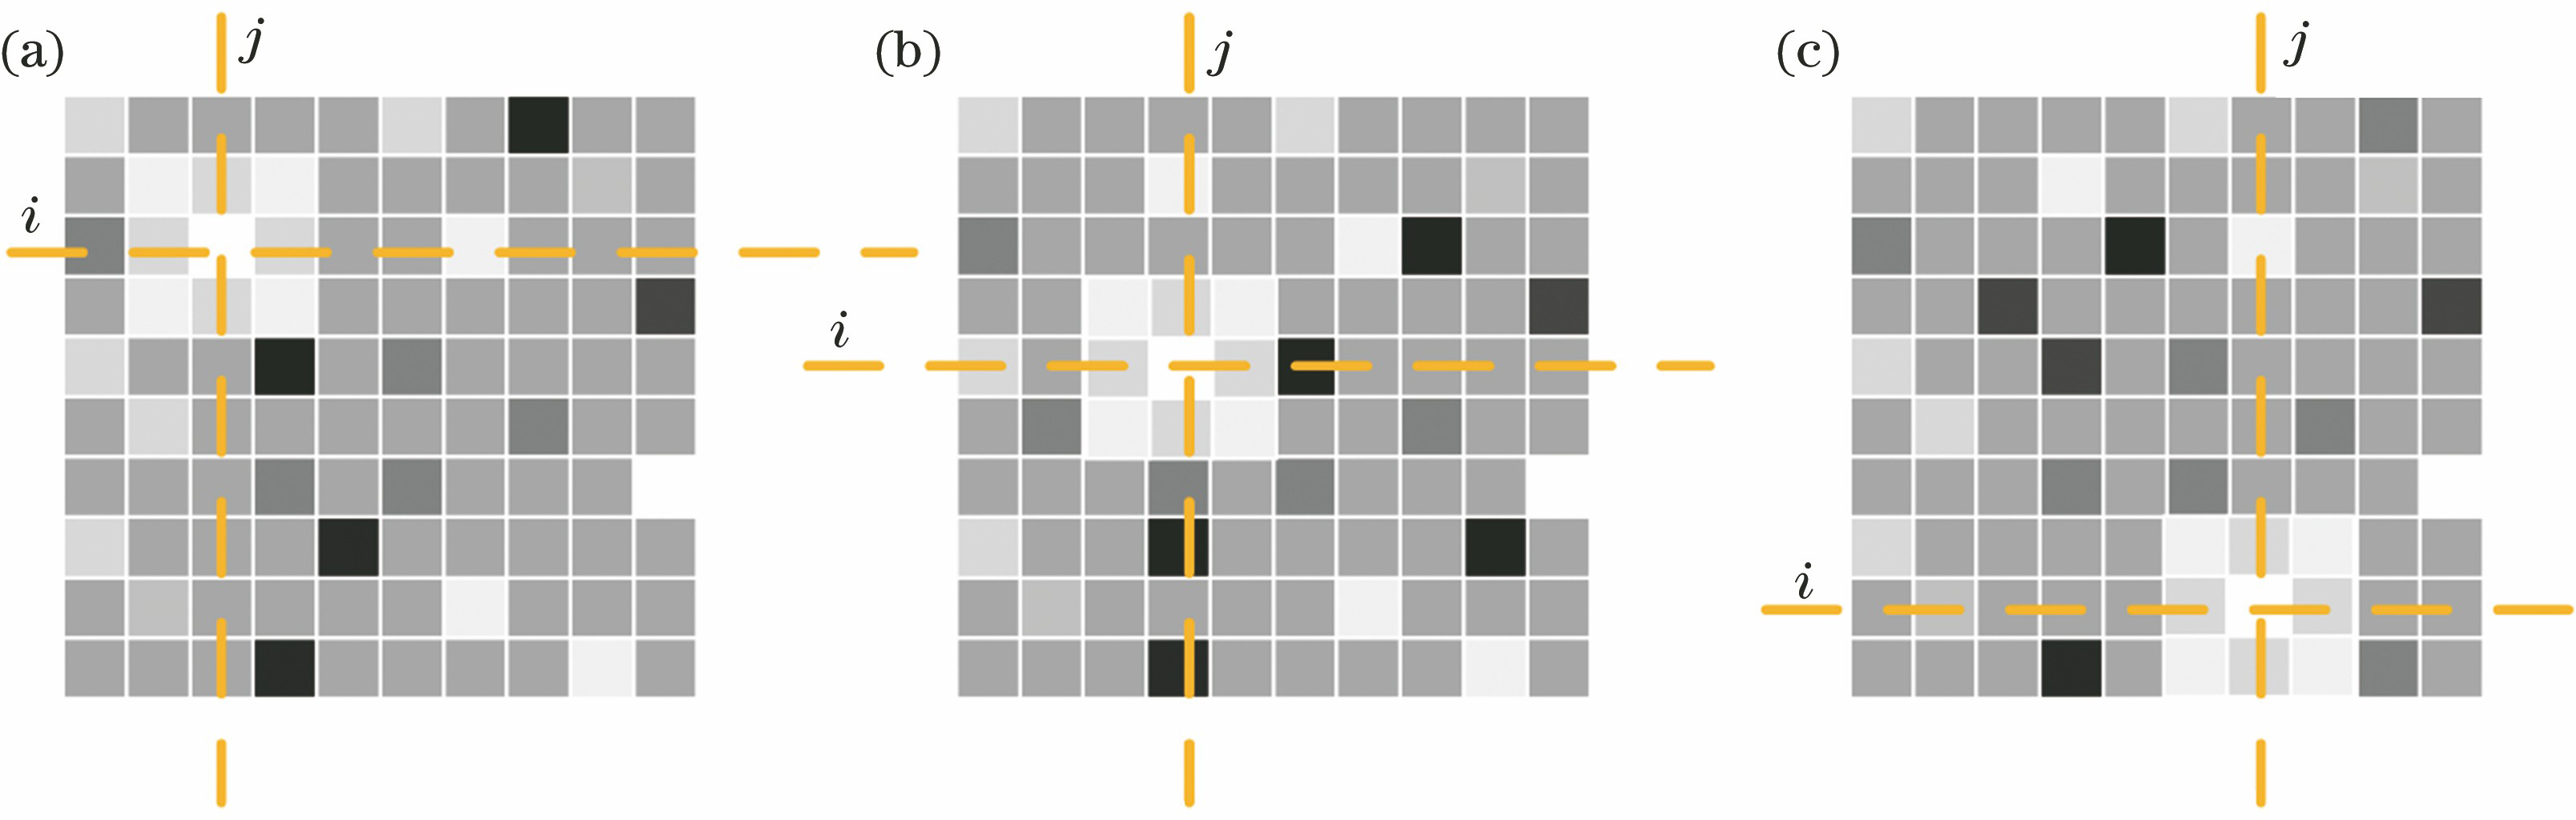 Schematic of multi-frame continuous stellar image. (a) First frame; (b) second frame; (c) kth frame